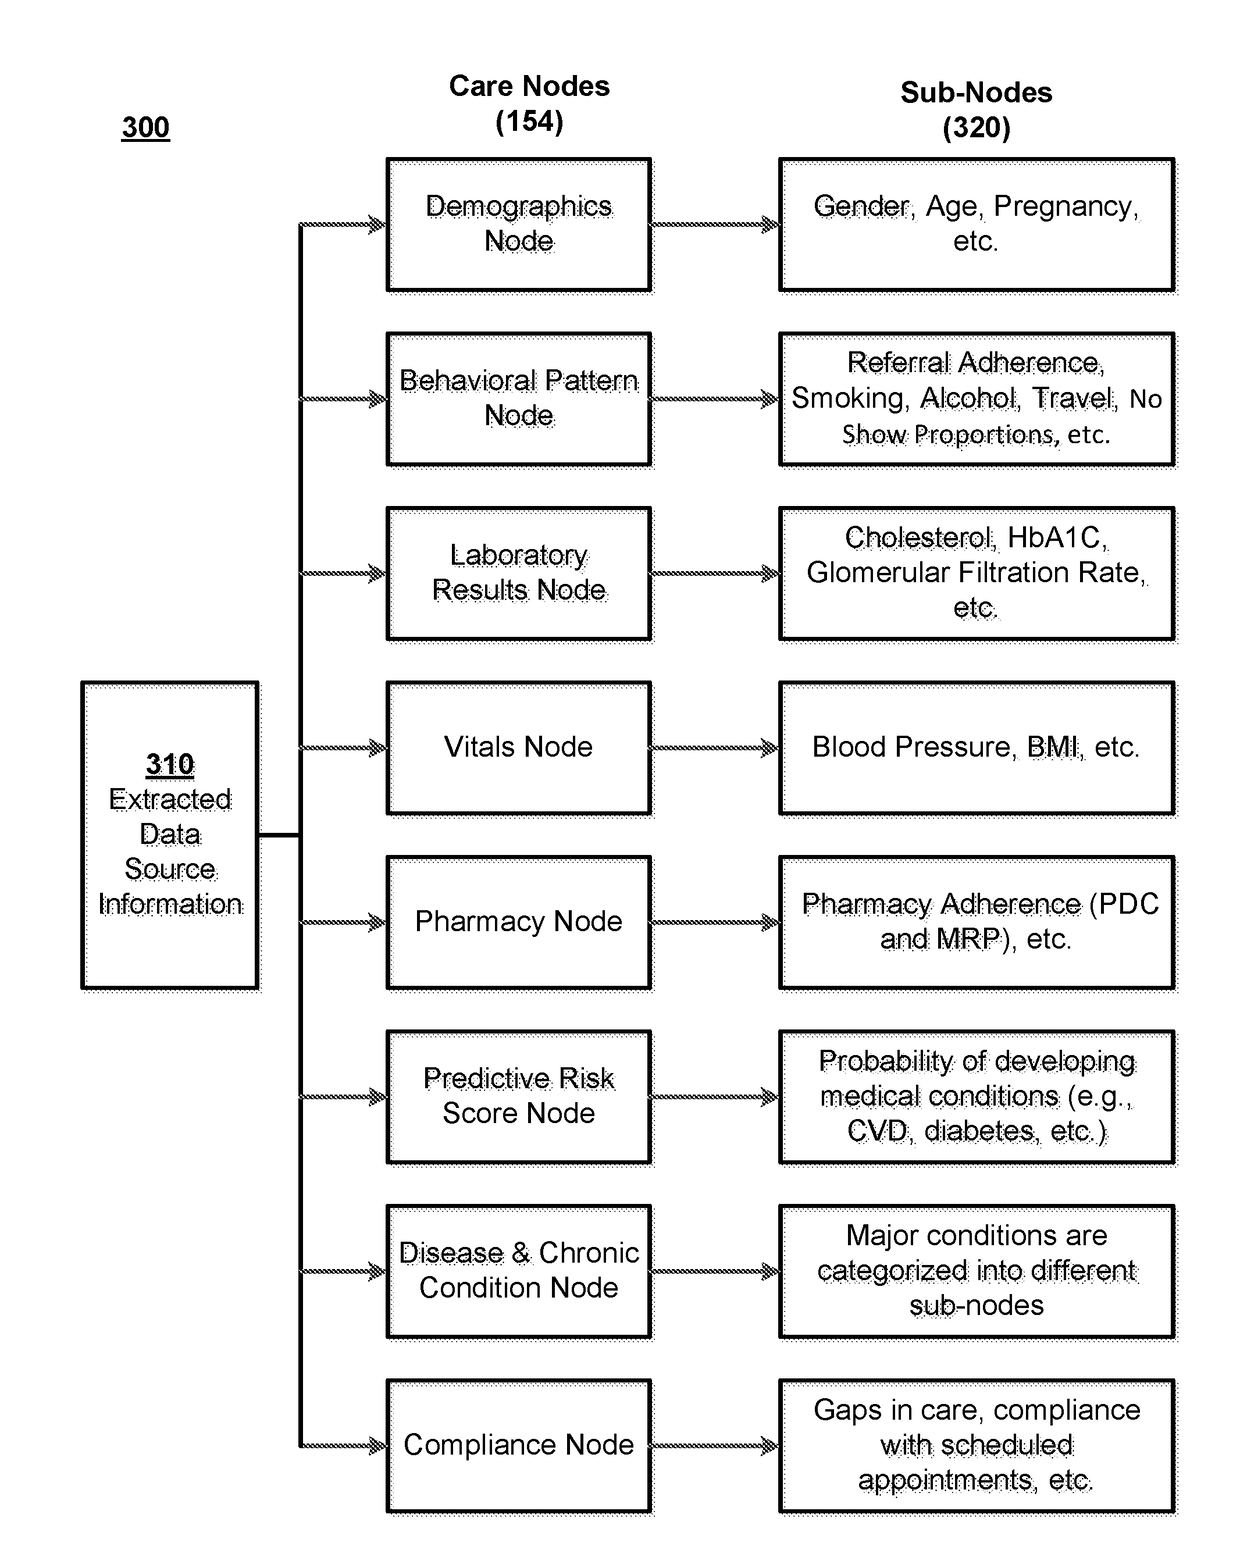 Systems and methods for care program selection utilizing machine learning techniques